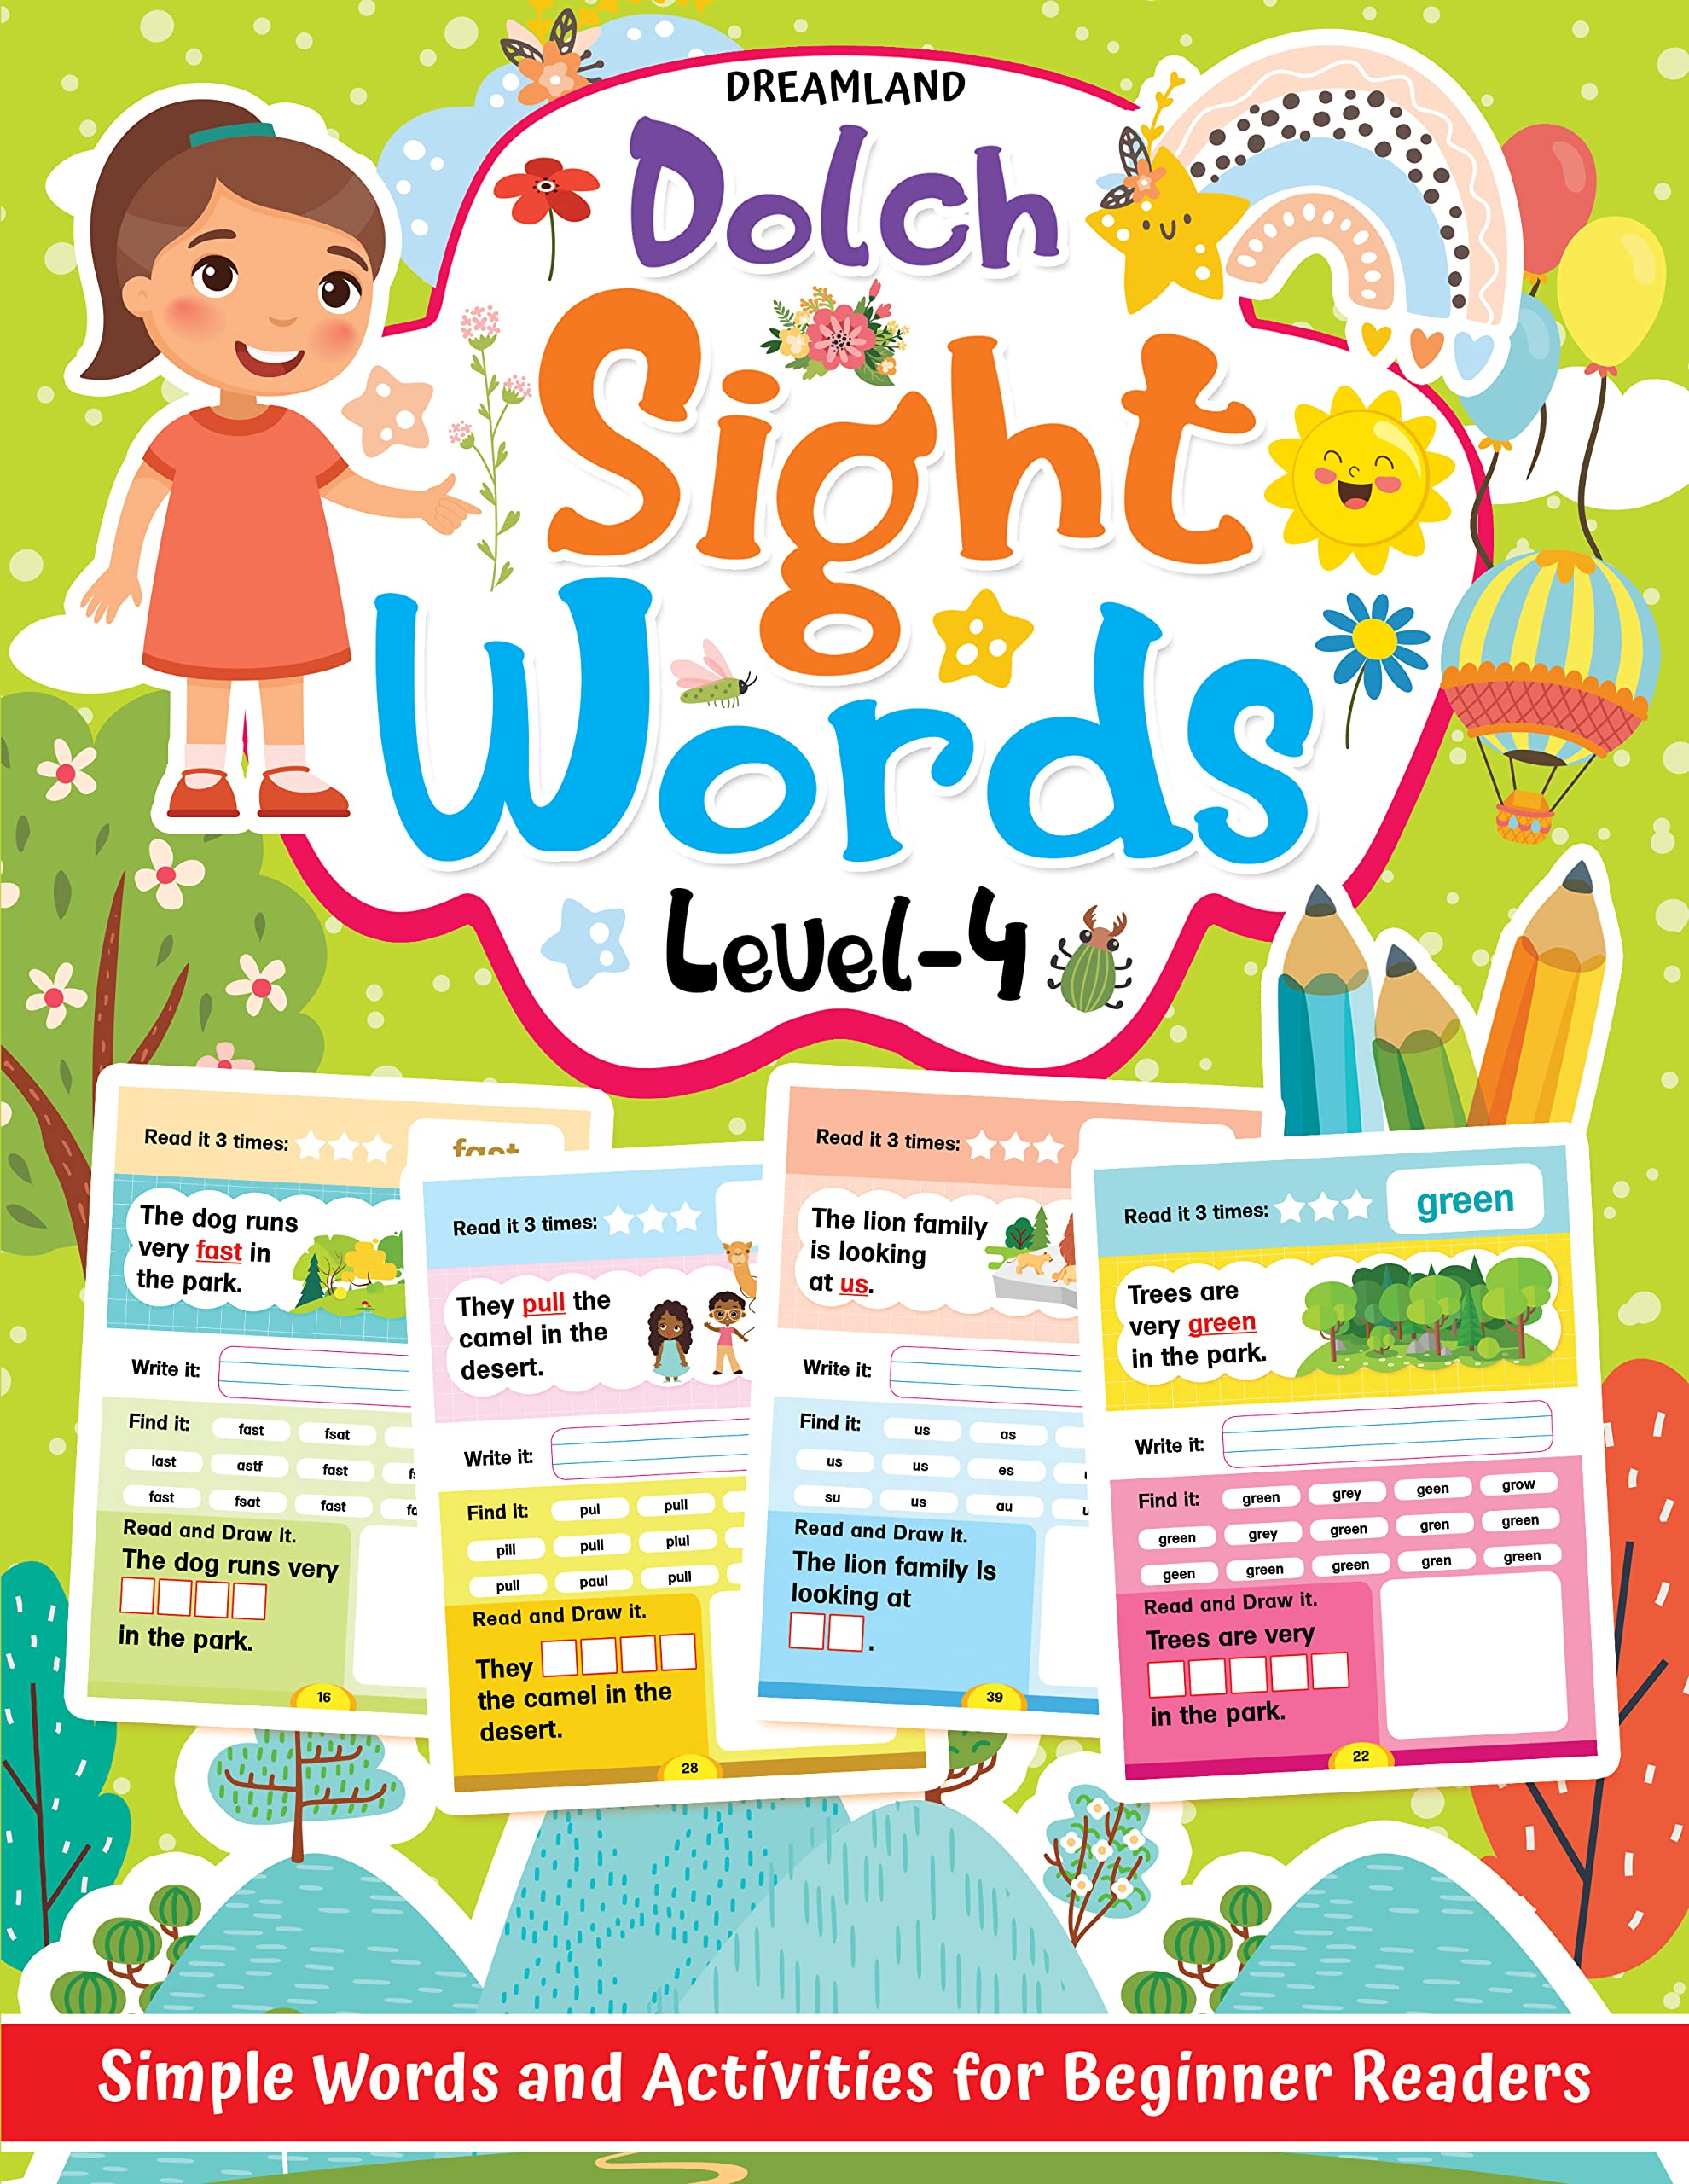 Dolch Sight Words Level 4 for Children Age 4 -8 Years